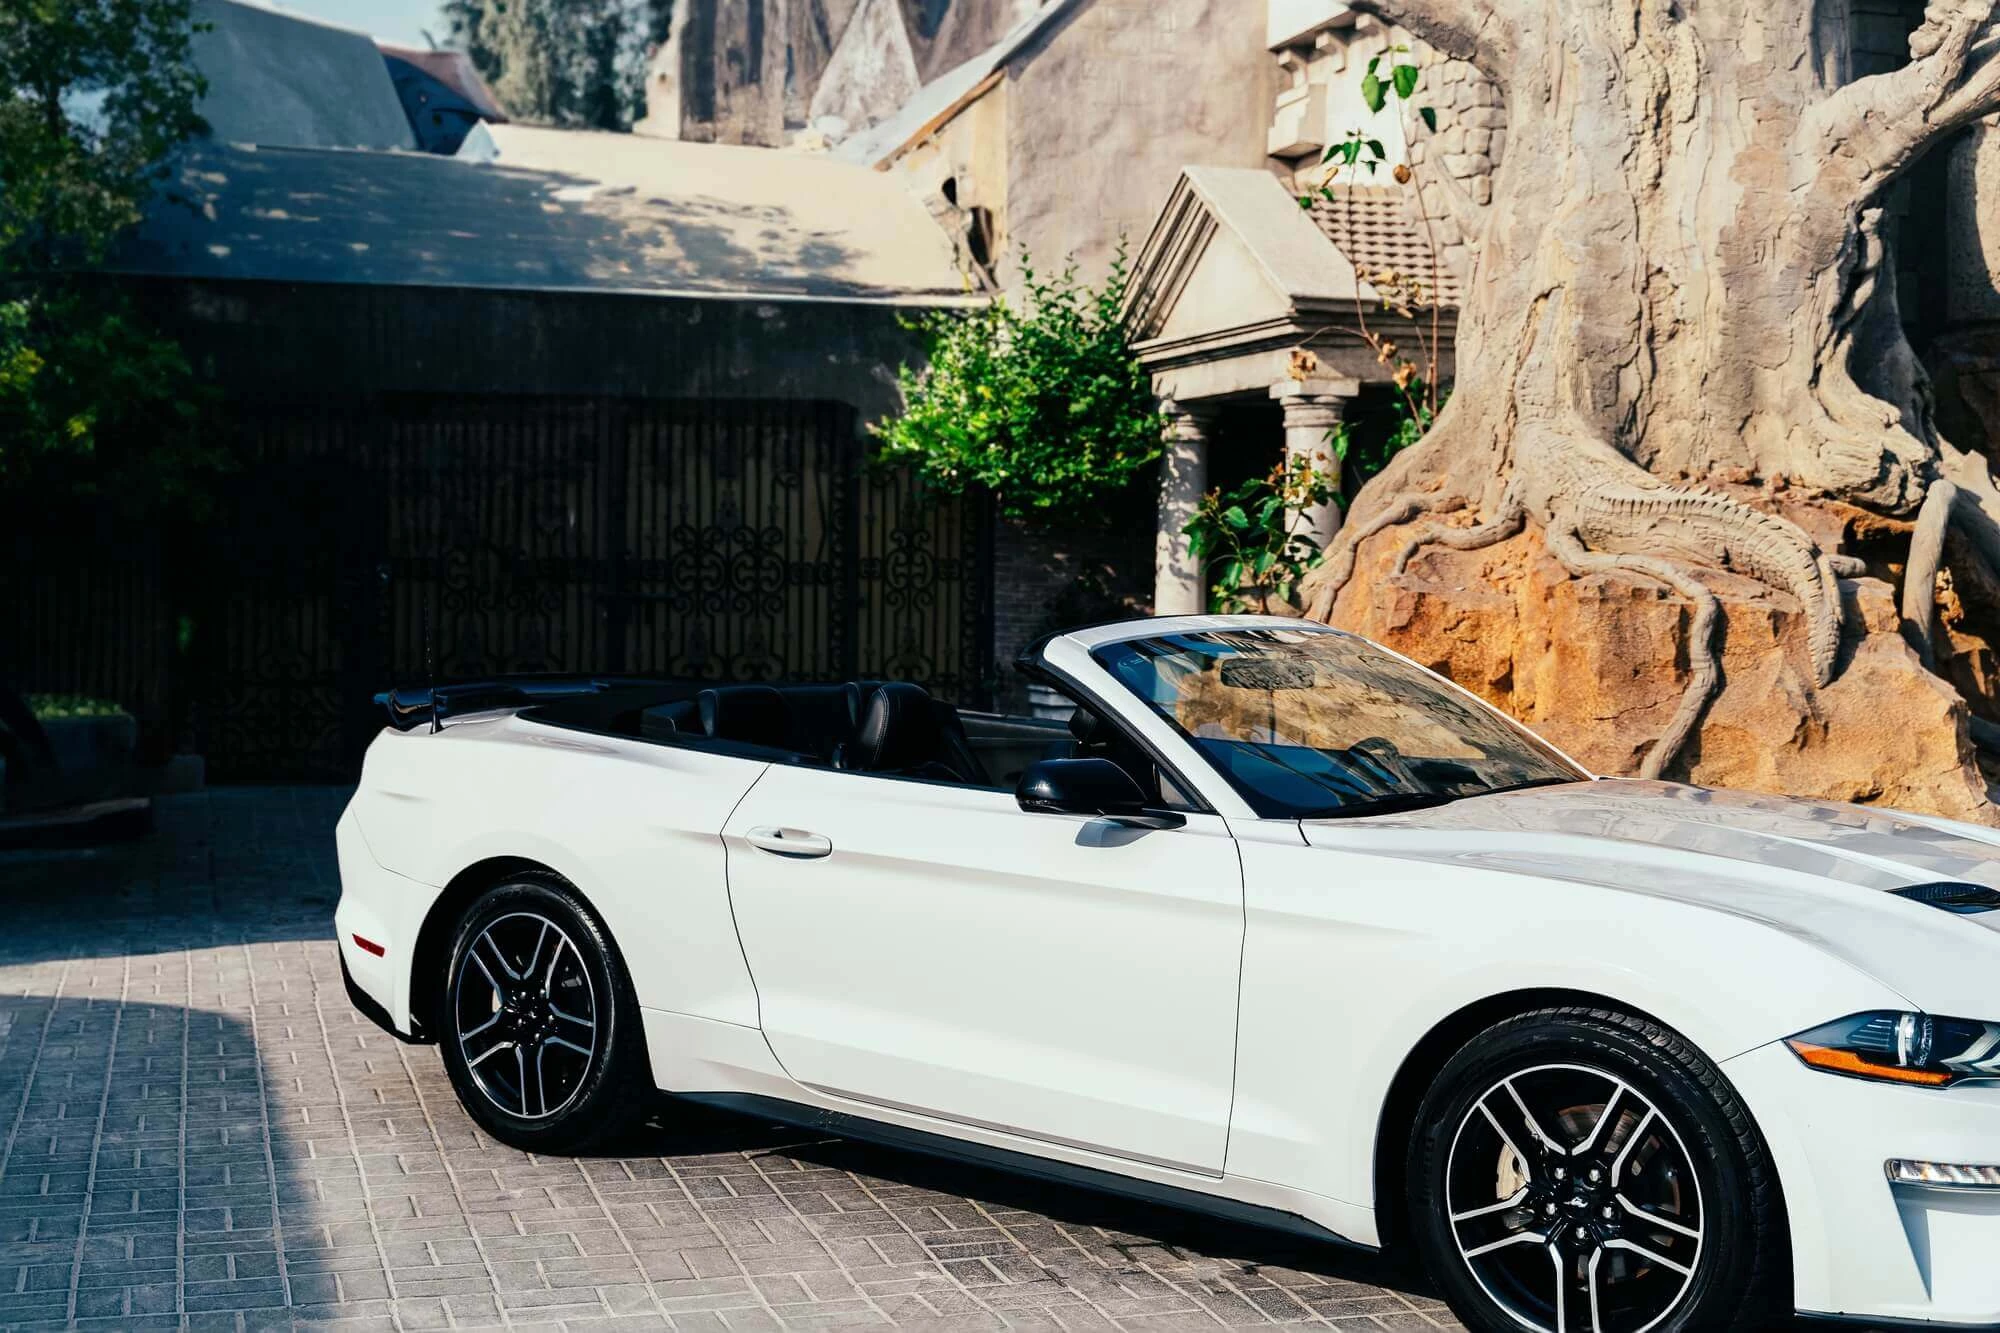 Ford Mustang Convertible White